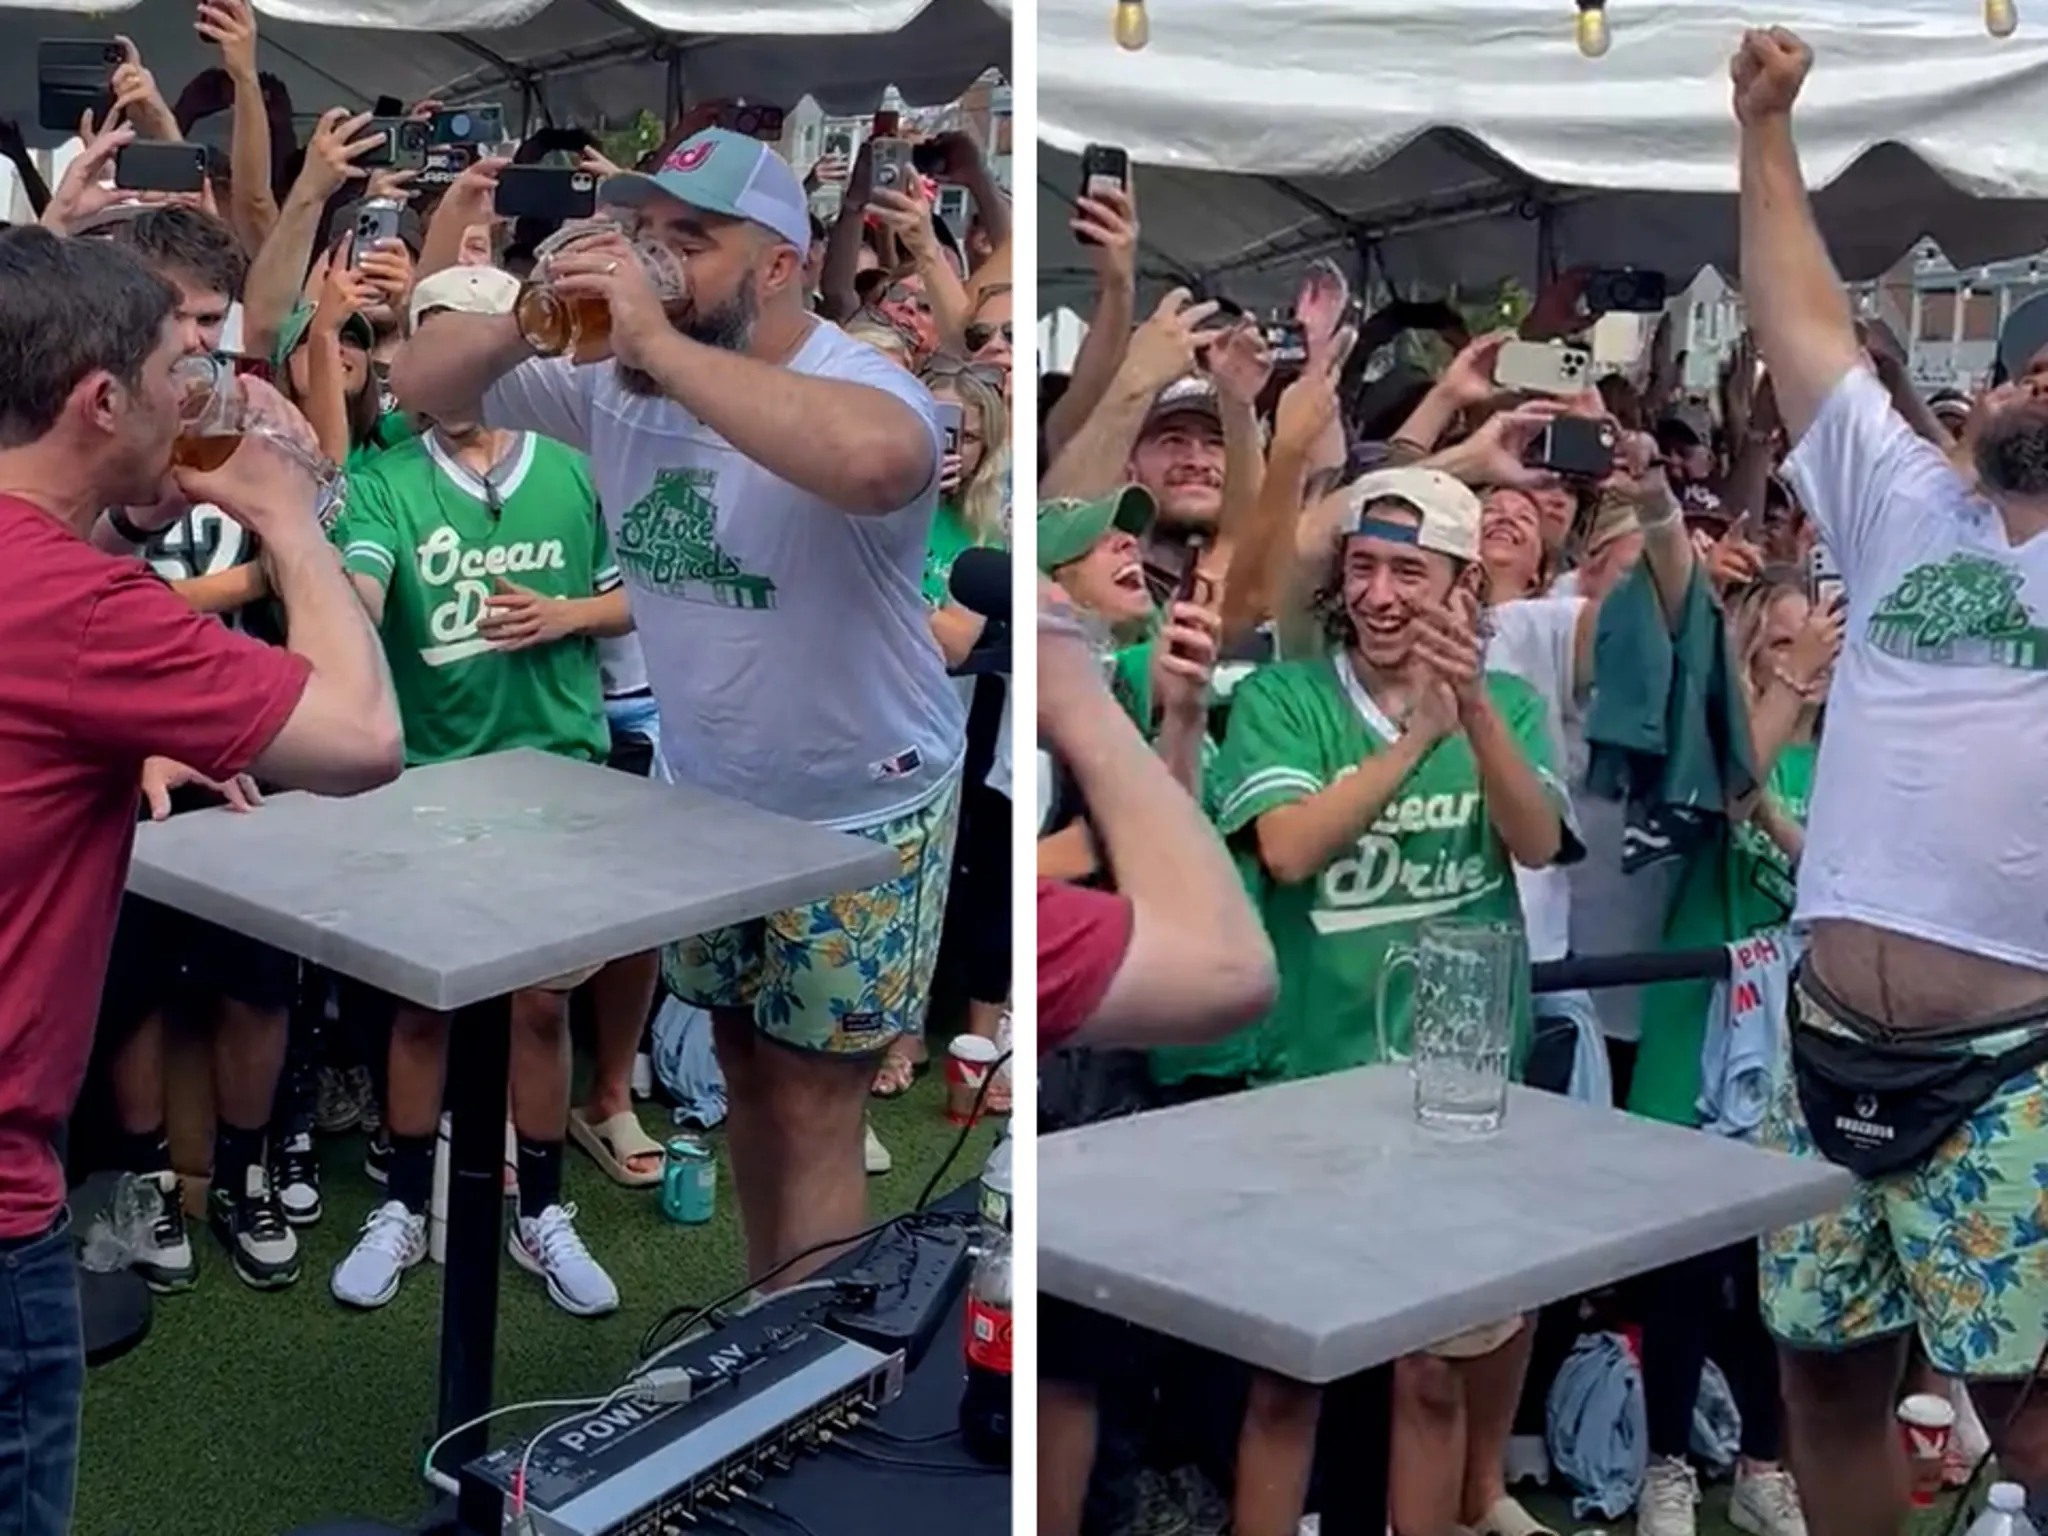 Jason Kelce officially sets dates to celebrity bartend at Ocean Drive, host Beer Bowl in Sea Isle City: Here’s the schedule and how to get tickets for the two-day event featuring the retired Eagles center, his brother Travis Kelce, and some of his former teammates.